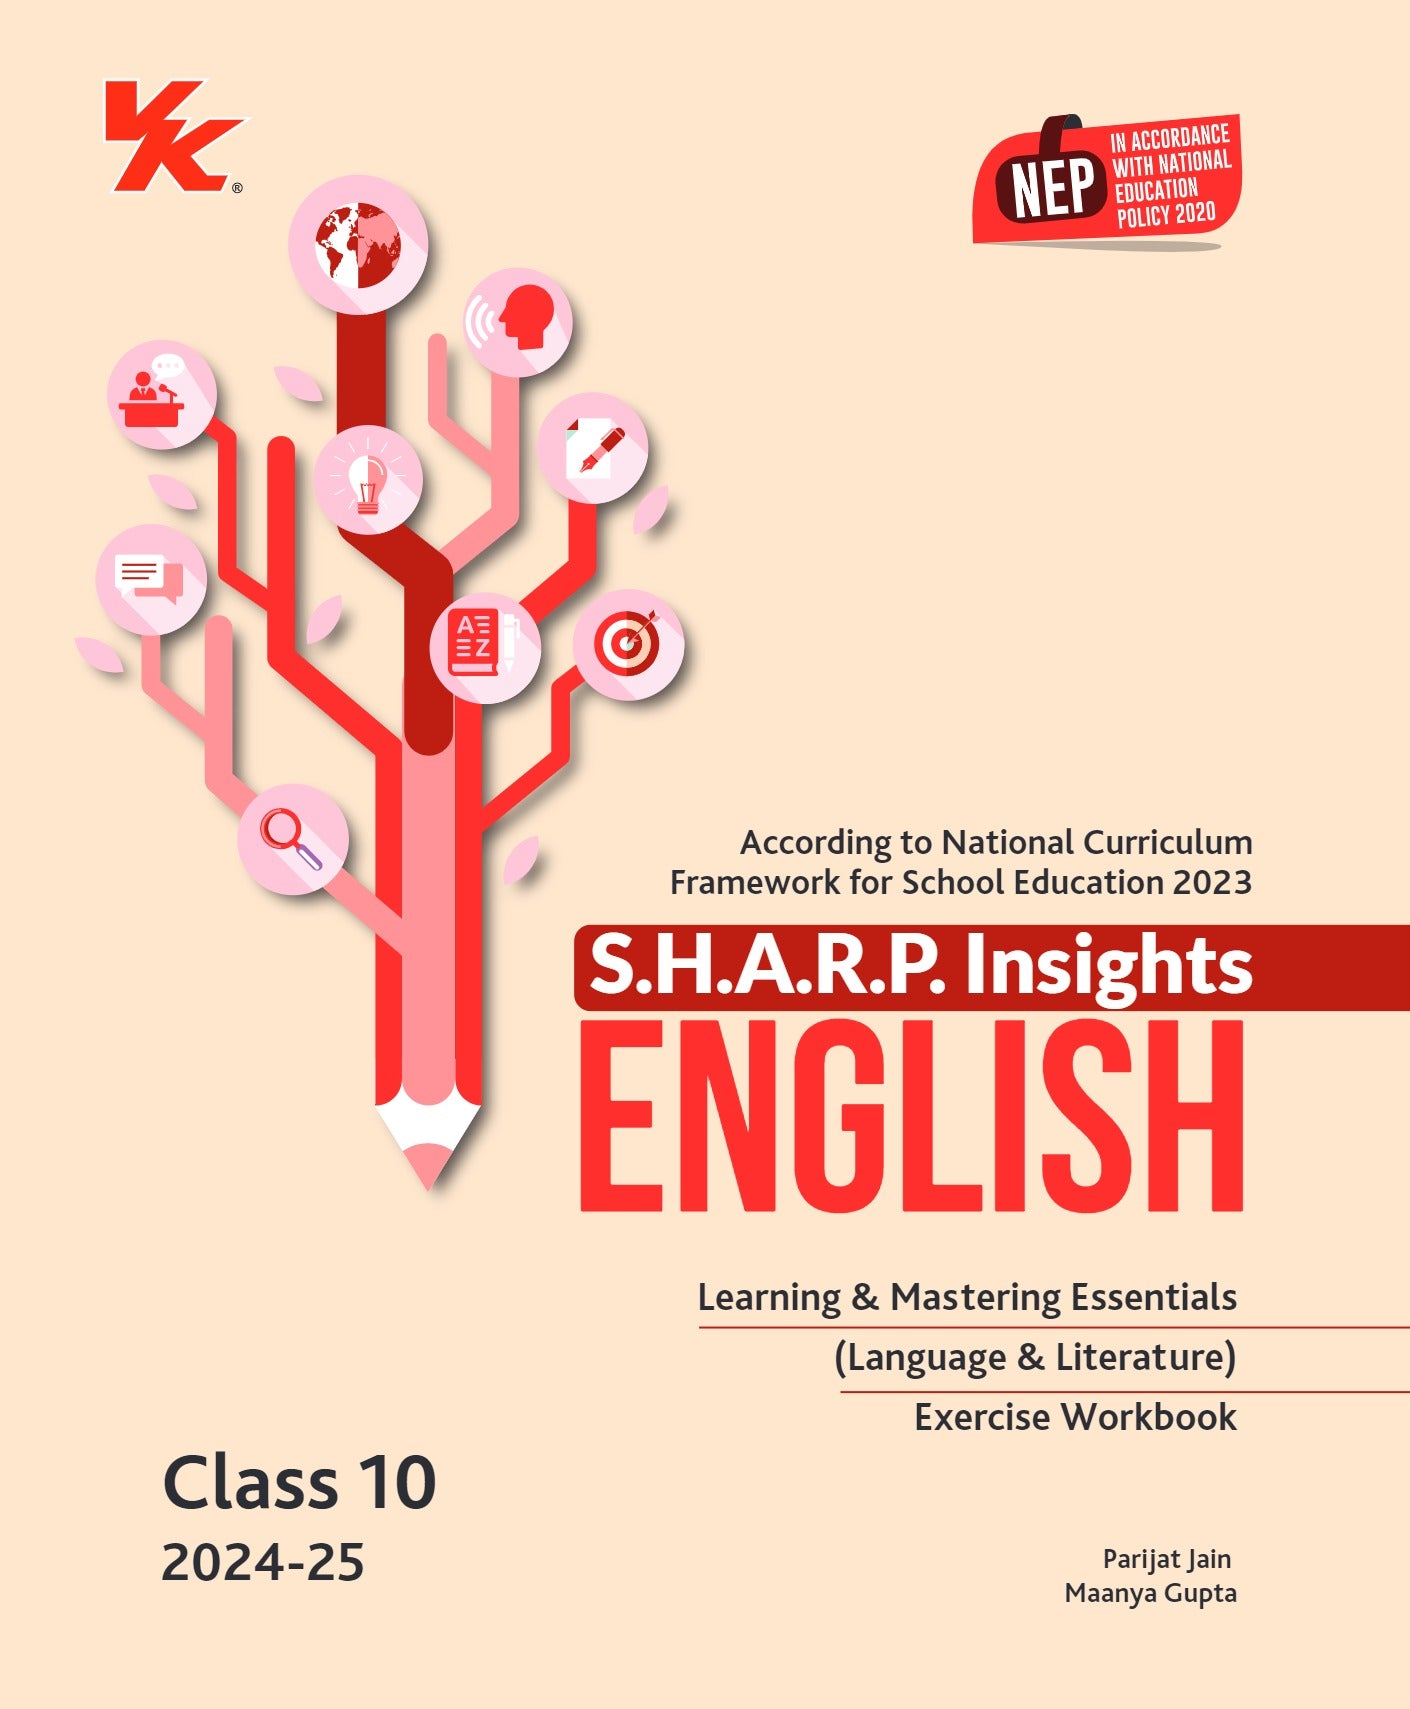 S.H.A.R.P. Insights for English (Language and Literature) Exercise Workbook for Class 10 CBSE 2024-25 by Parijat Jain (IIT-D, IIM-A) & Maanya Gupta (IIM-A)